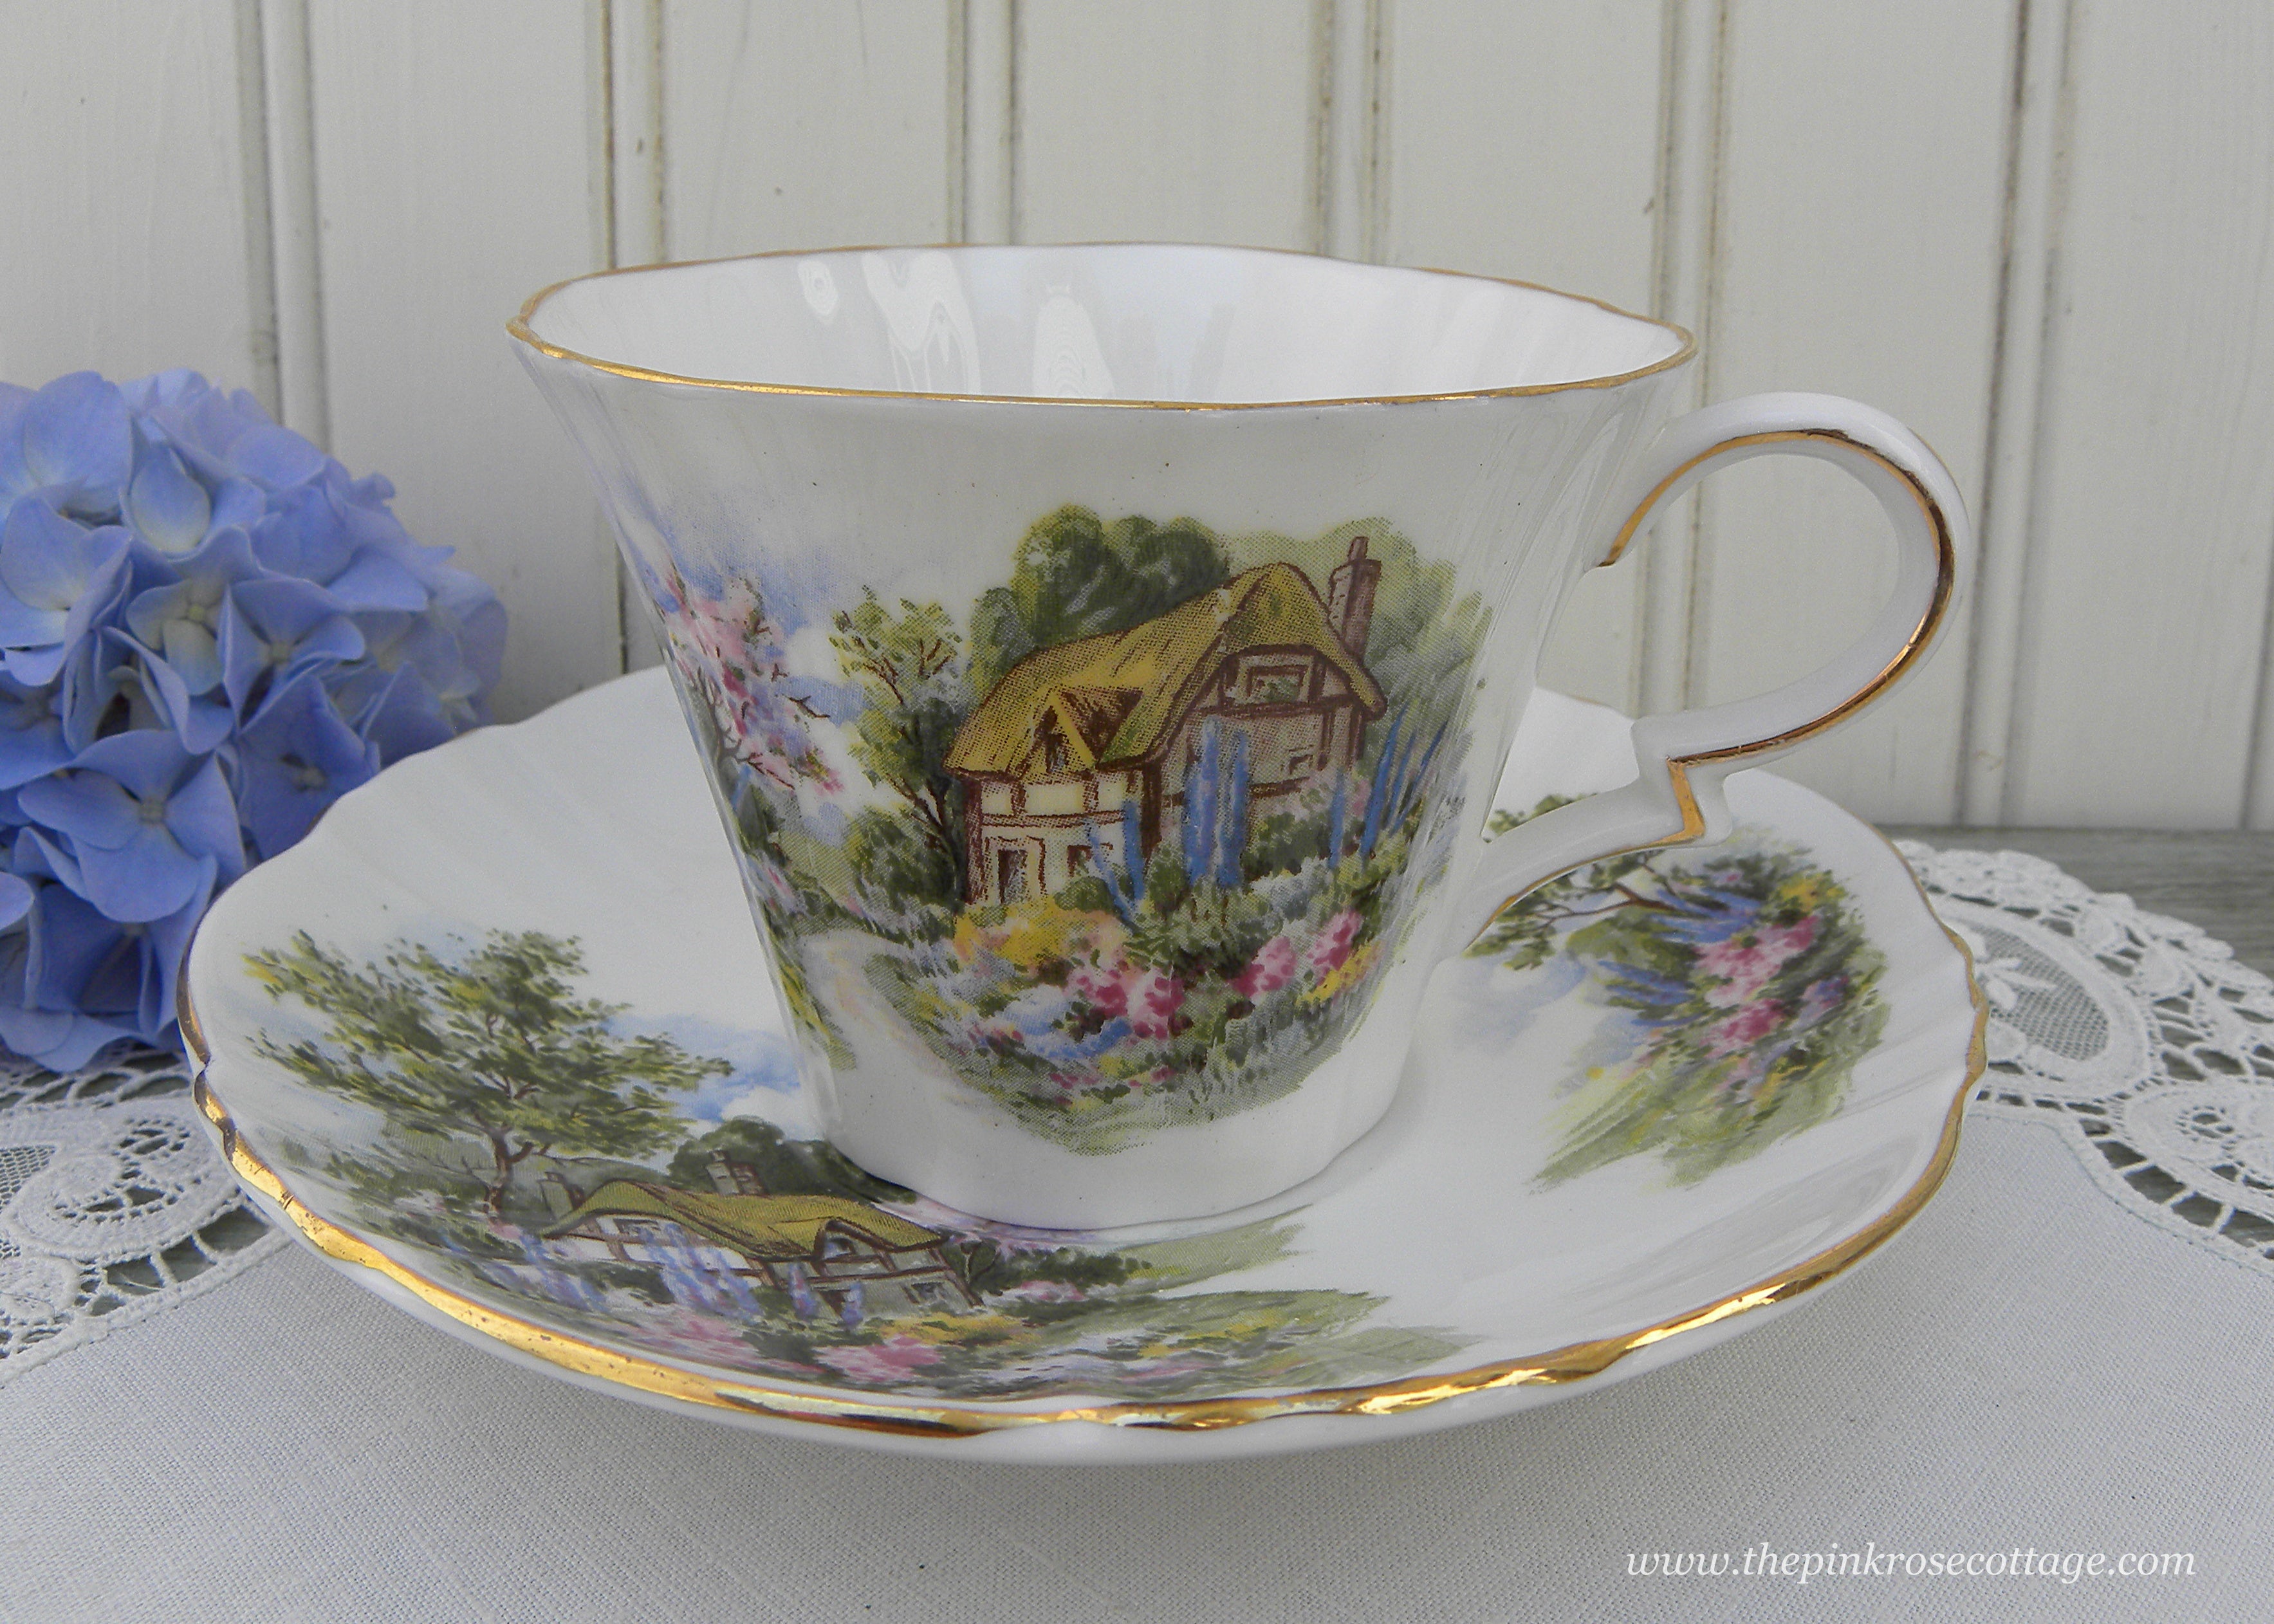 Vintage Royal Standard Tea Cup and Saucer Fine Bone China England / Pretty  Floral Tea Cup 